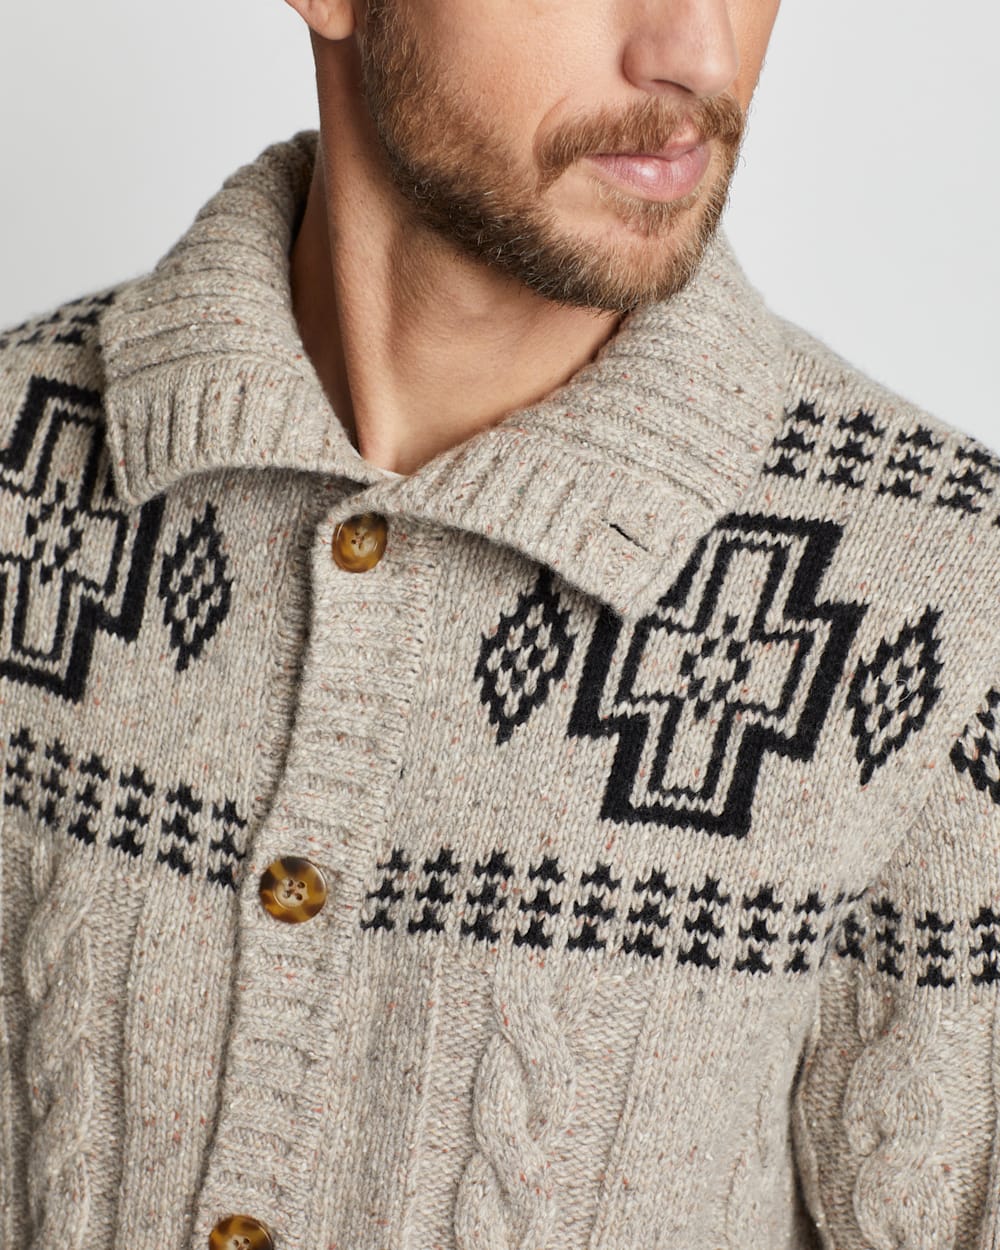 ALTERNATE VIEW OF MEN'S CABLE CROSS LAMBSWOOL CARDIGAN IN NATURAL DONEGAL image number 2